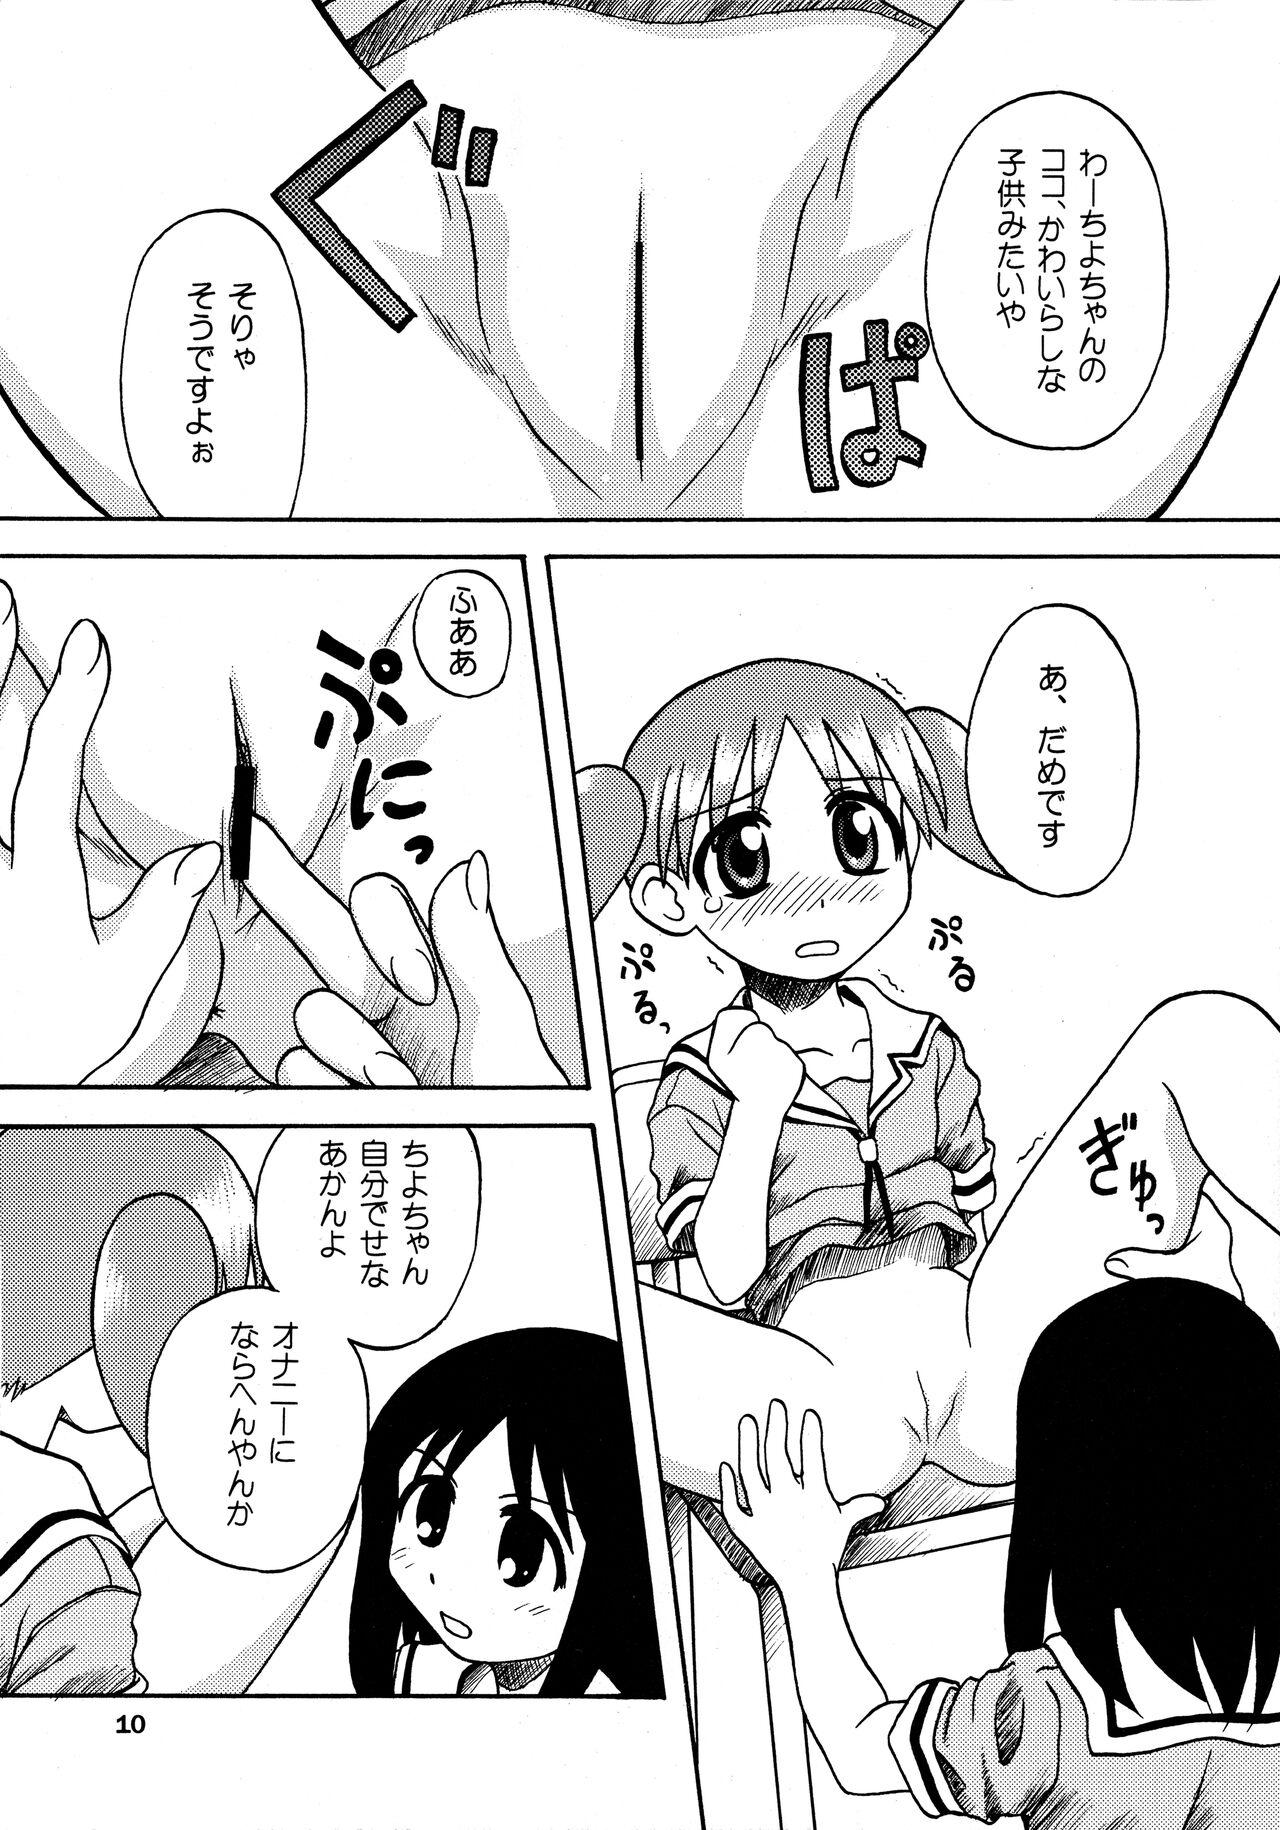 Soapy ANOTHER LIFE - Azumanga daioh Sexo - Page 10